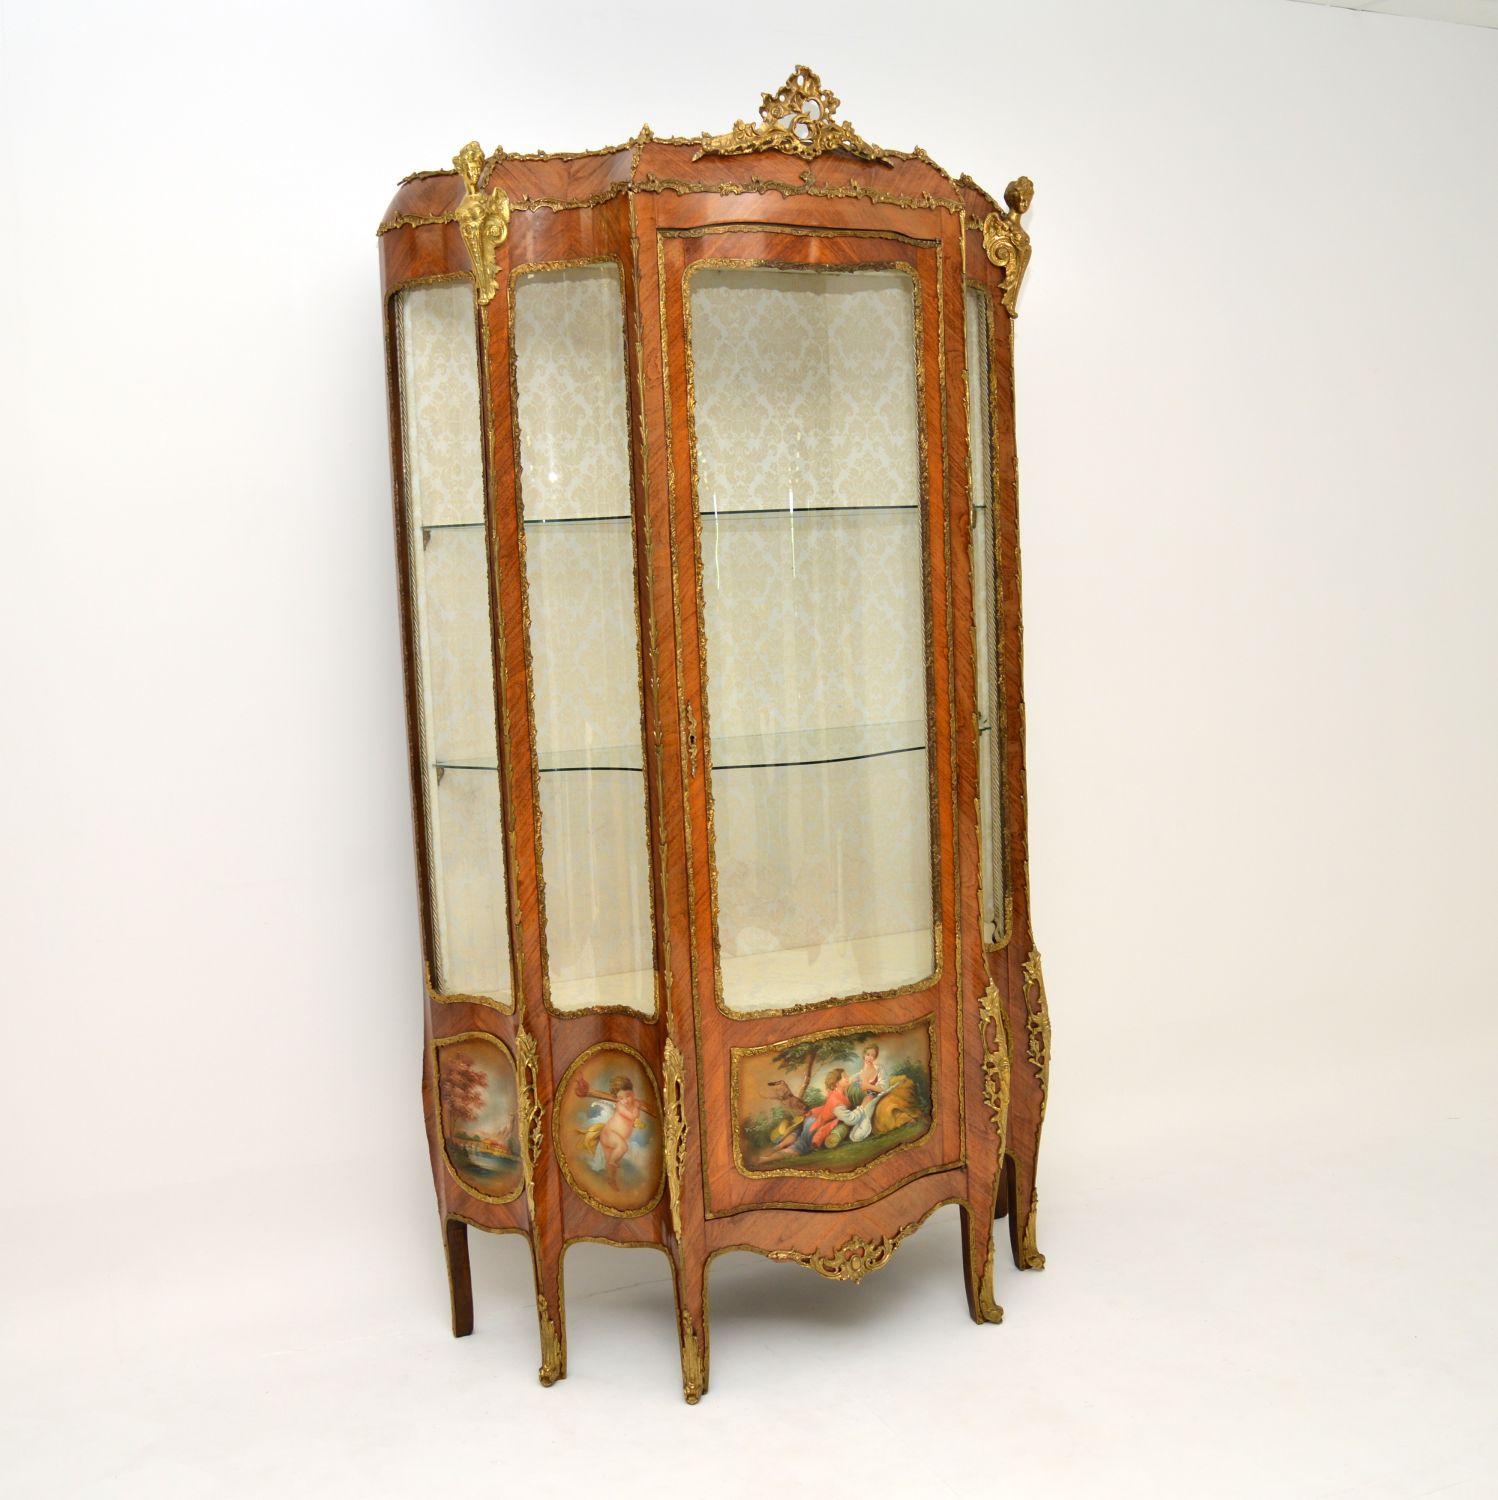 A stunning and extremely impressive antique French Louis XIV style display cabinet, which I would date from around the 1930-50’s period. It is both breakfront & serpentine shaped.
It is of amazing quality, you don’t often see them in this scale and